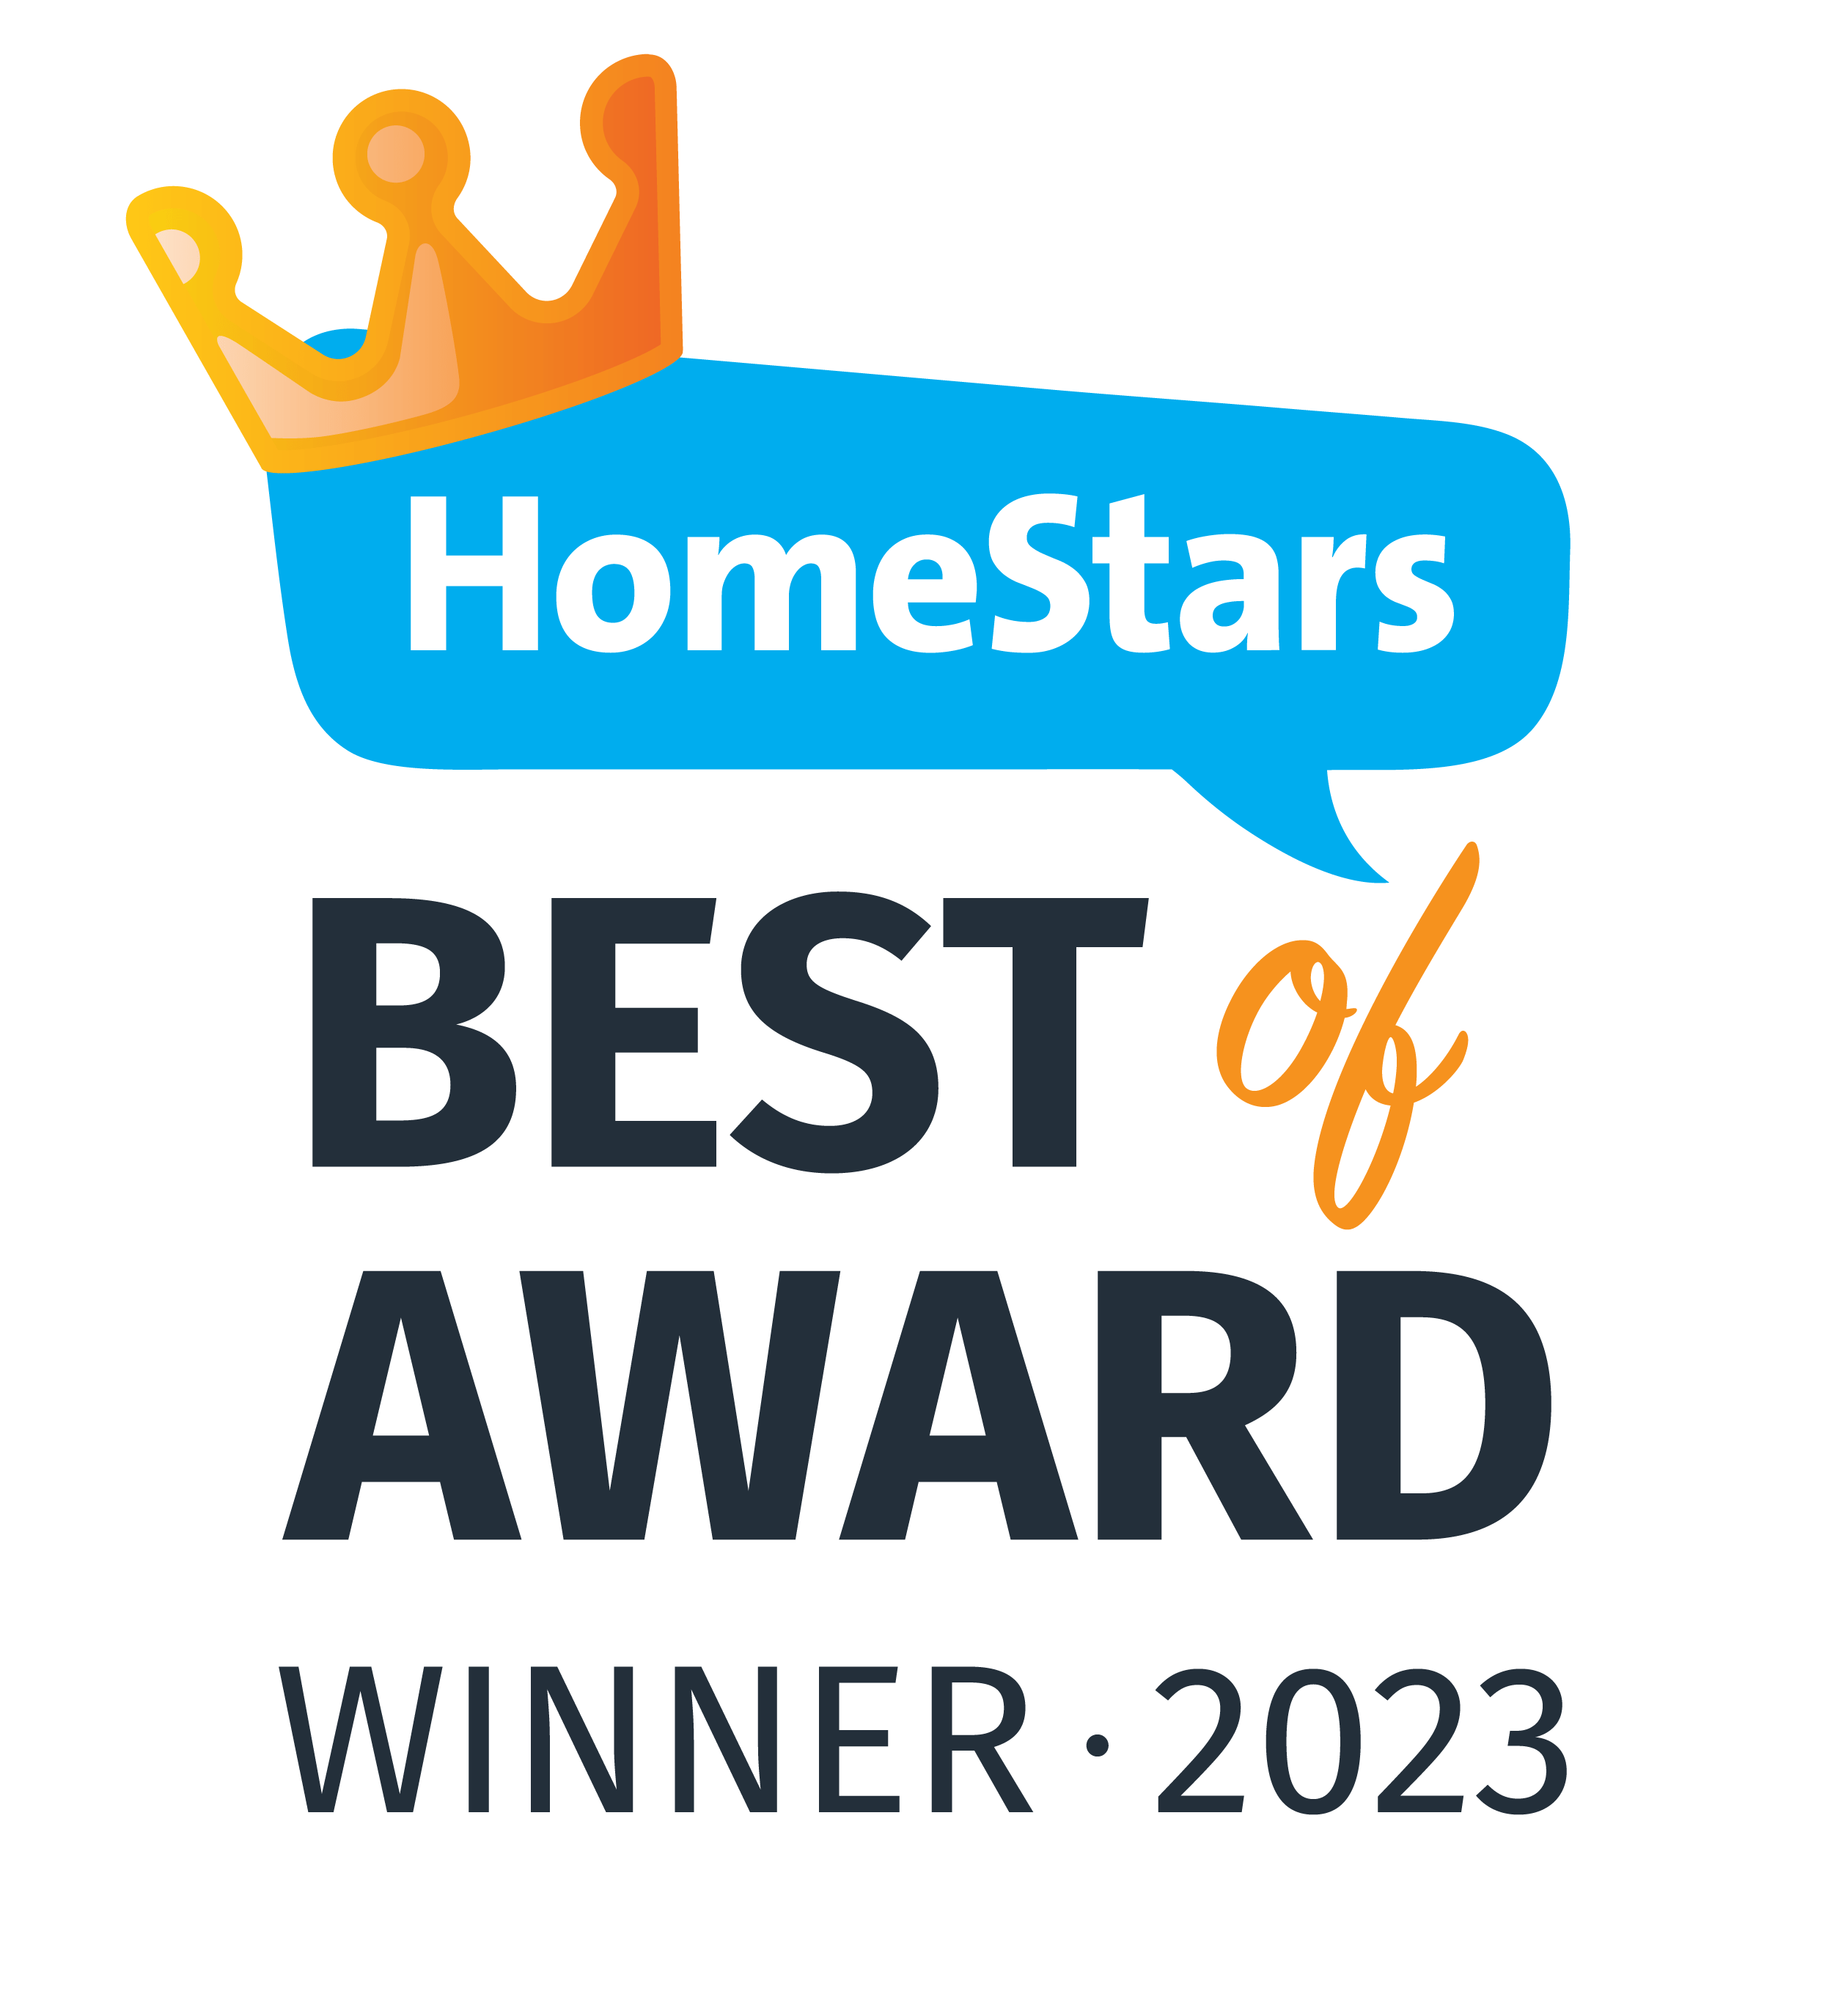 Chromatist Painters won the Best of HomeStars Awards 2023 that celebrate pros who go above and beyond when it comes to our three pillars of integrity, customer service, and consistency. Pros must be HomeStars Verified and have a strong track record of high level of service, reputation, and reliability